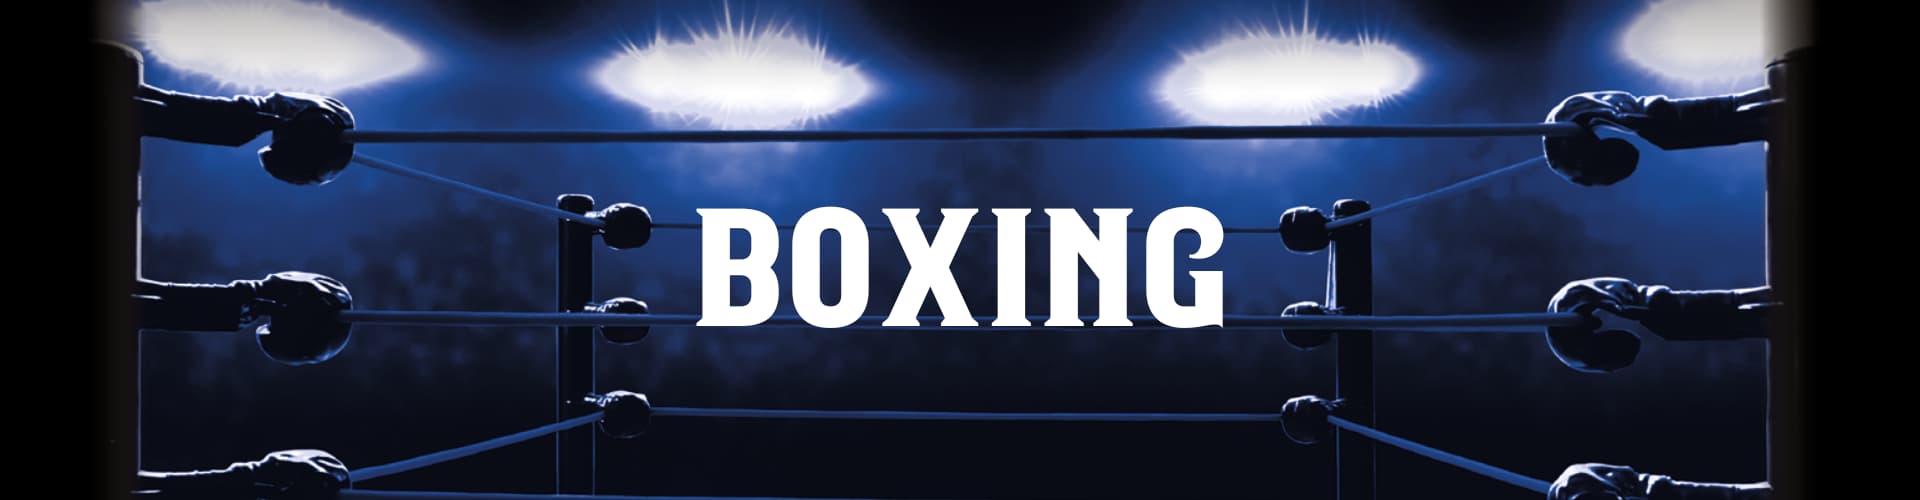 Watch Live Boxing in East Kilbride at Hudsons Pub